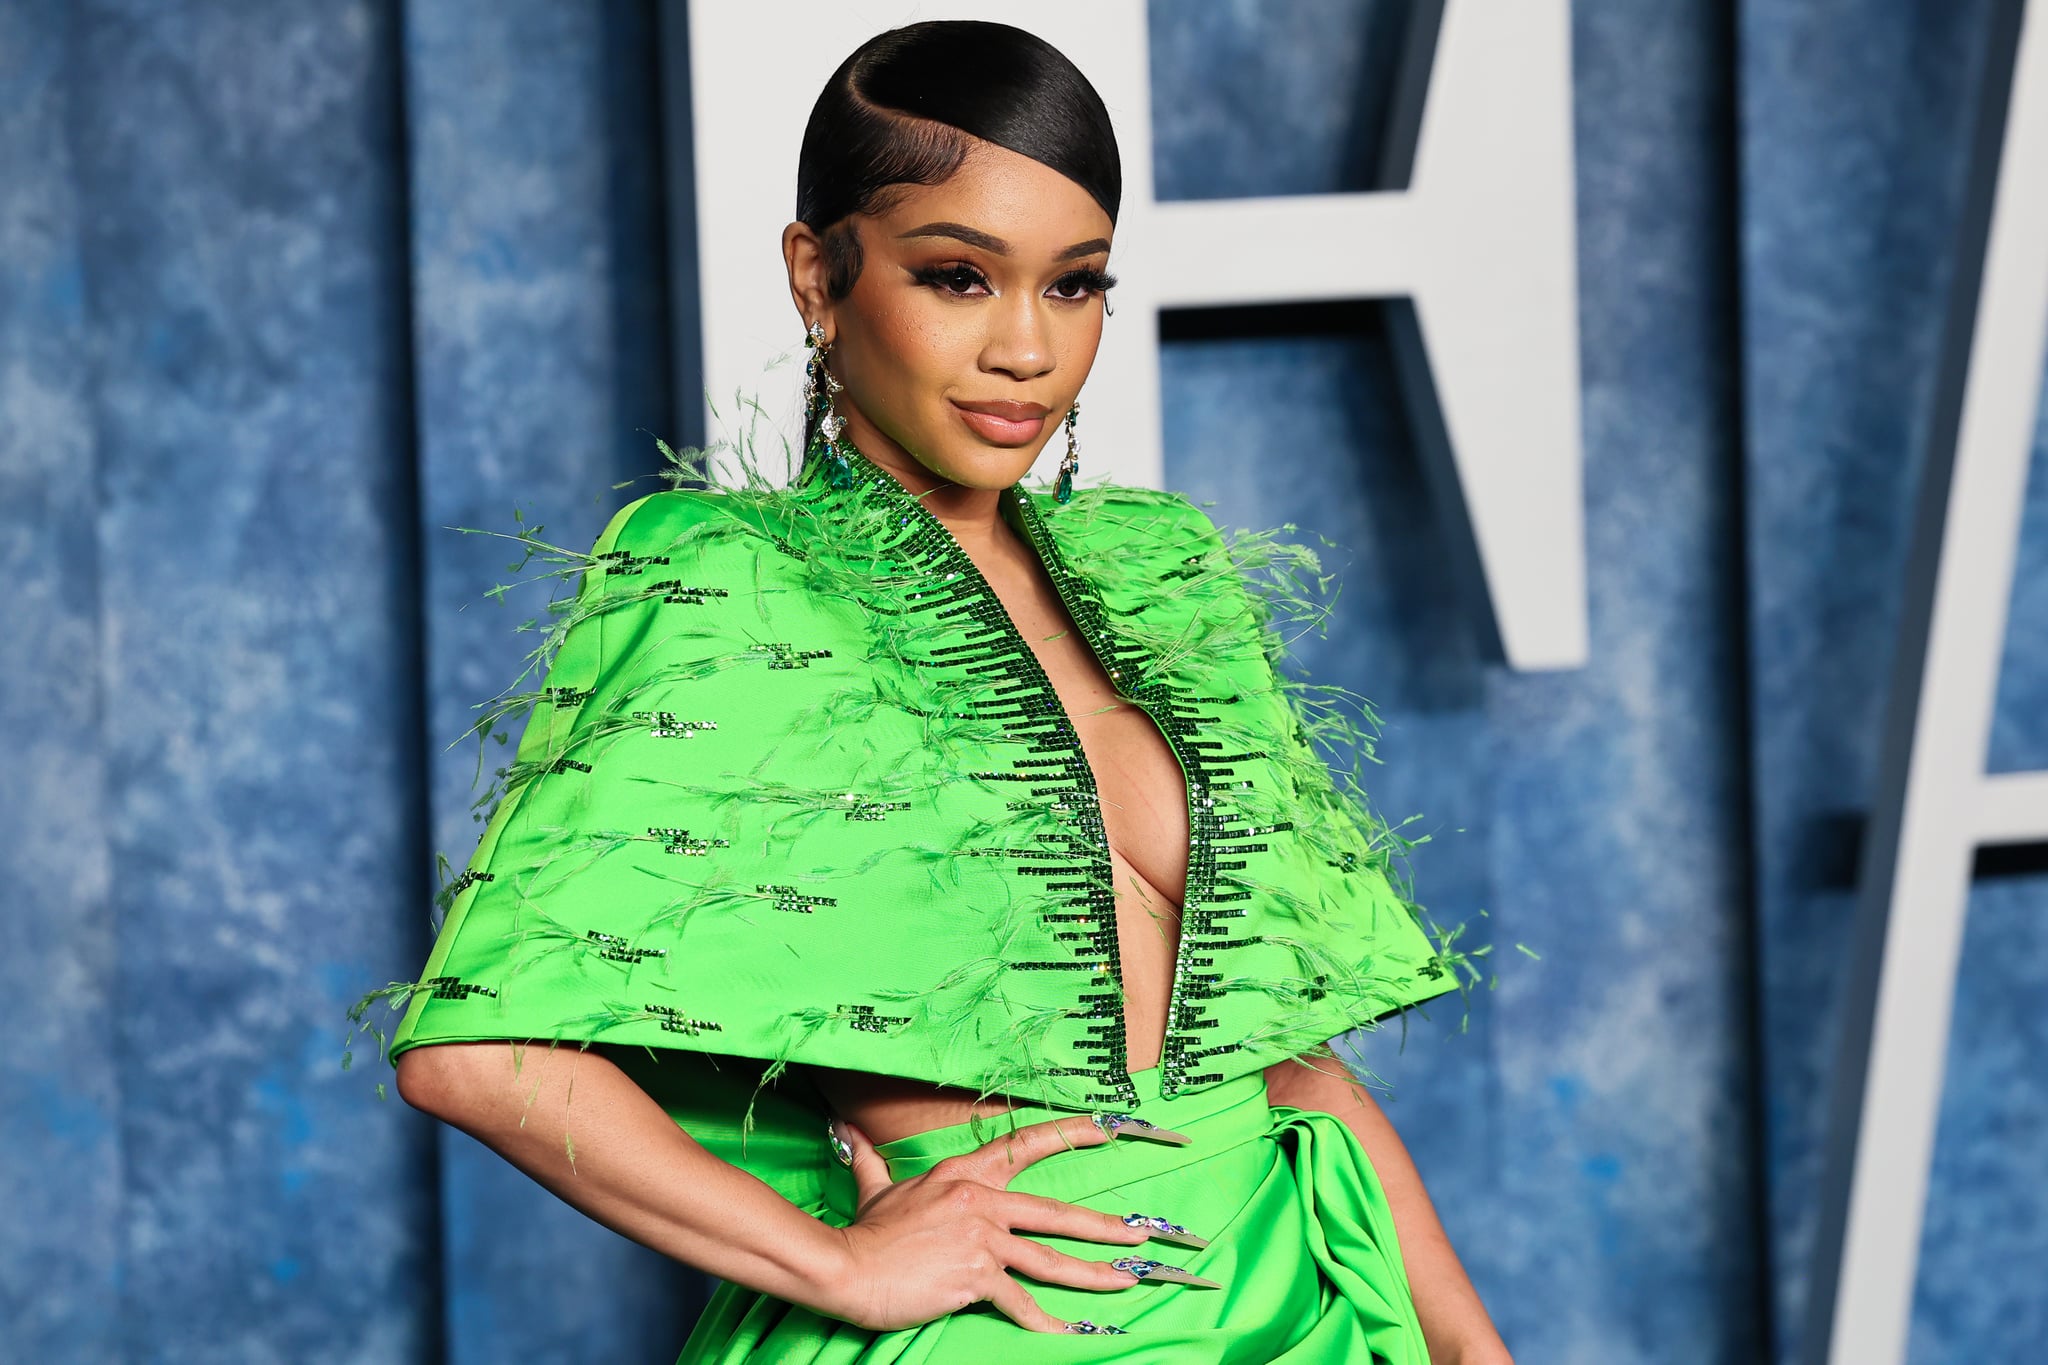 BEVERLY HILLS, CALIFORNIA - MARCH 12: Saweetie attends the 2023 Vanity Fair Oscar Party Hosted By Radhika Jones at Wallis Annenberg Centre for the Performing Arts on March 12, 2023 in Beverly Hills, California. (Photo by Leon Bennett/FilmMagic)